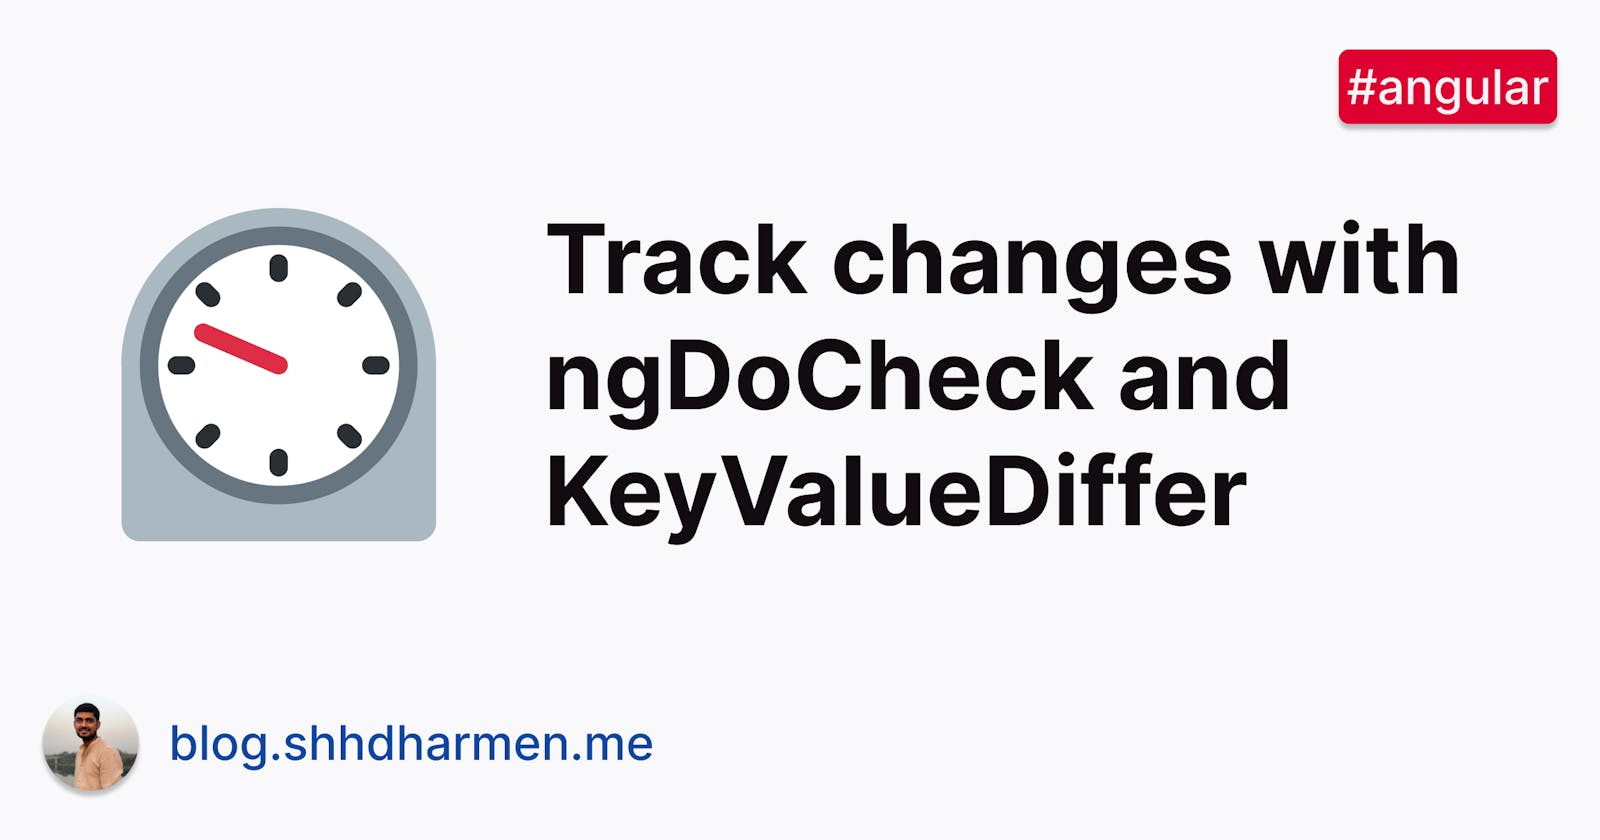 How to track changes in ngDoCheck with KeyValueDiffer